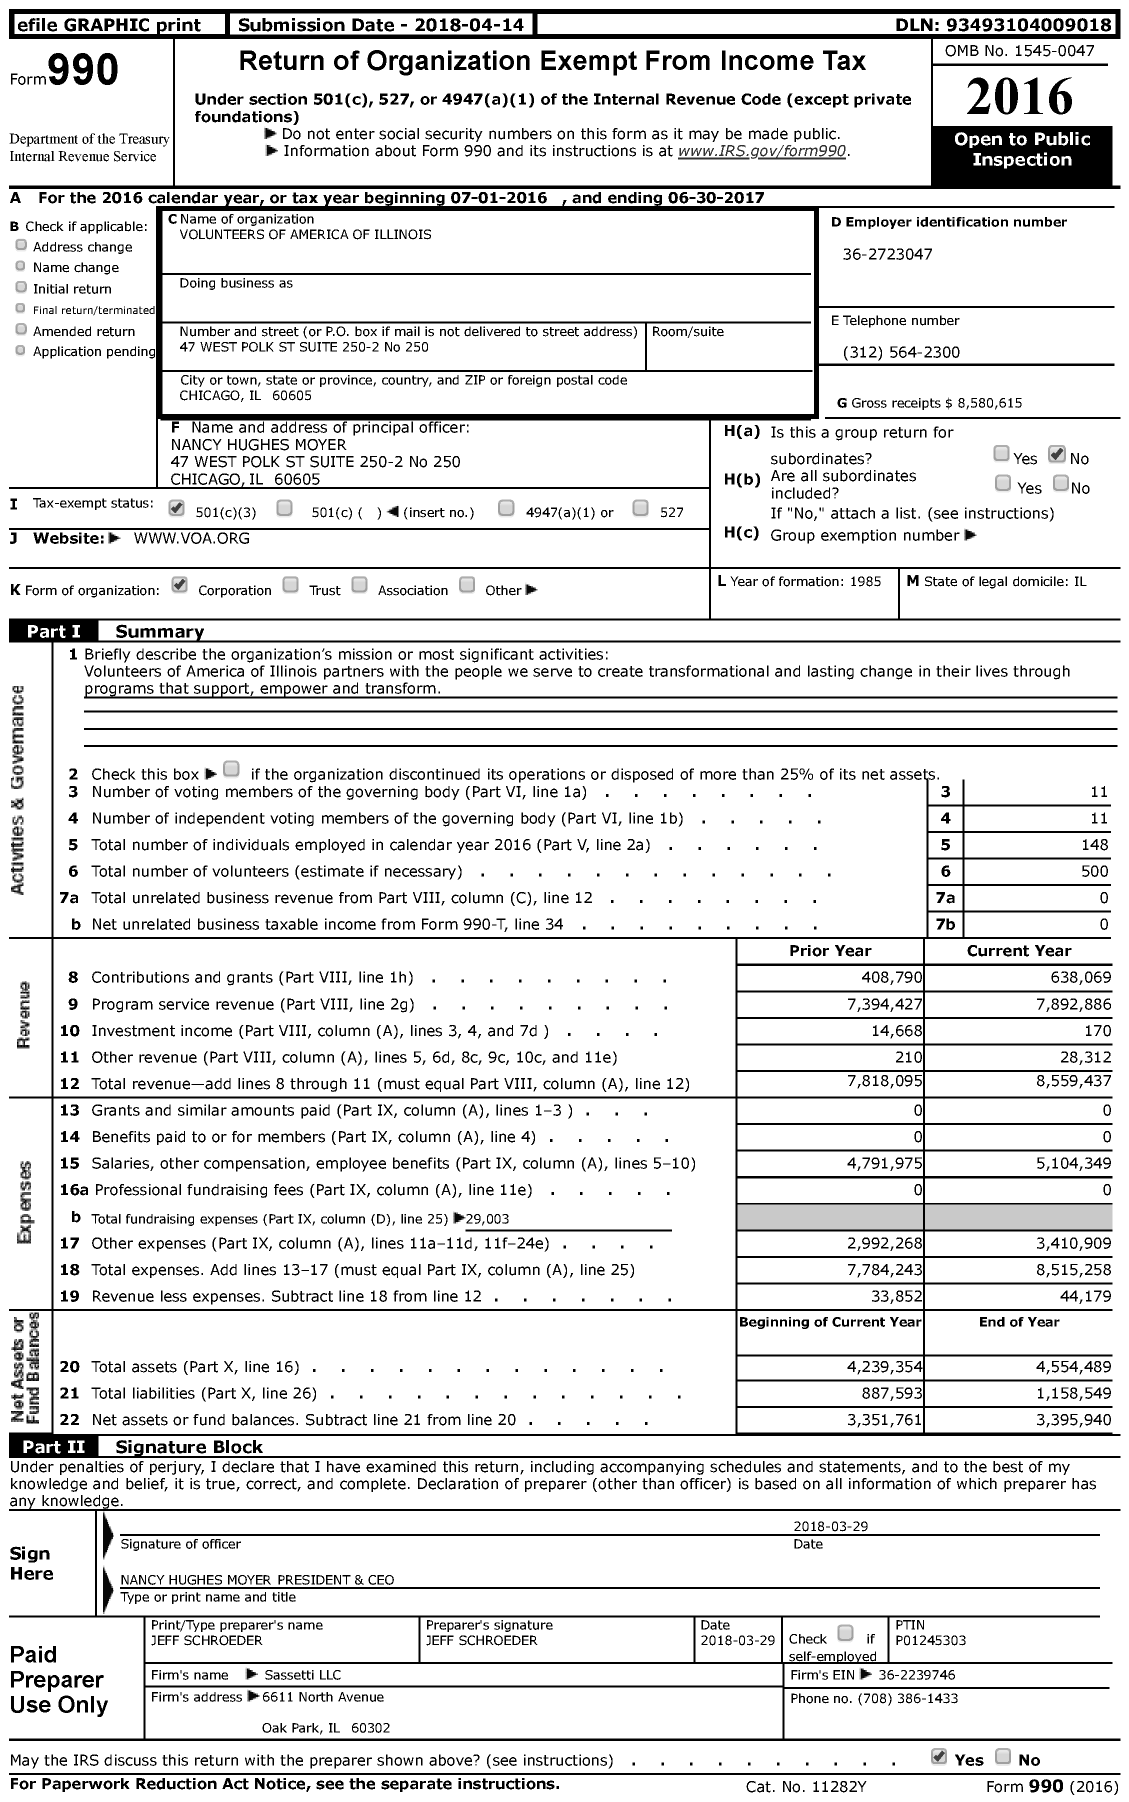 Image of first page of 2016 Form 990 for Volunteers of America of Illinois (VOA of IL)